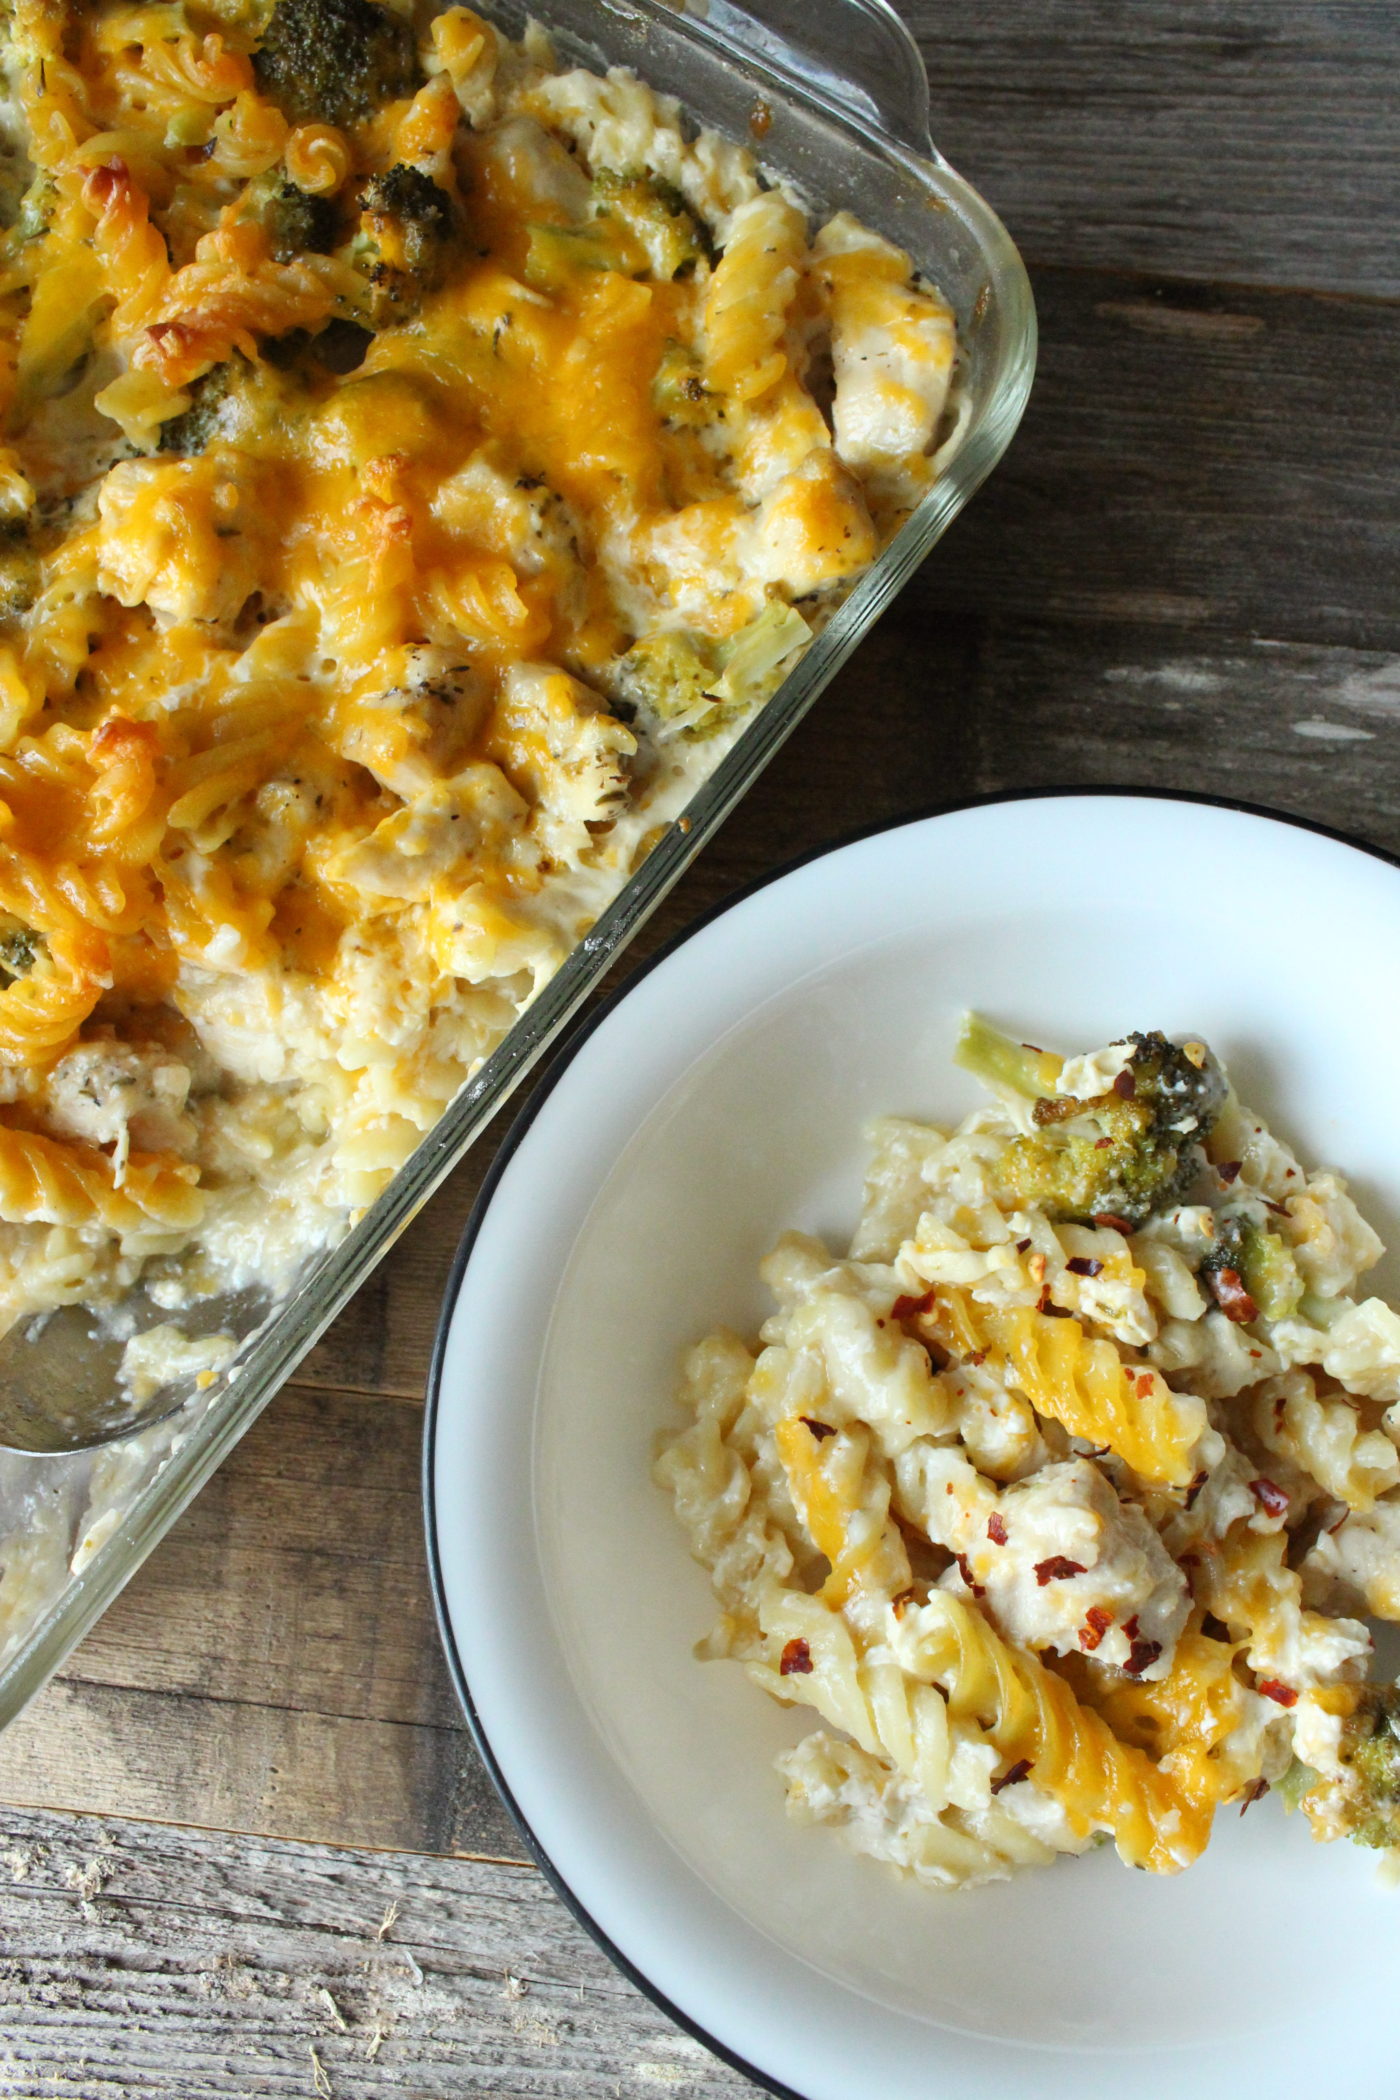 Chicken and broccoli bake | Eat.Drink.Frolic.